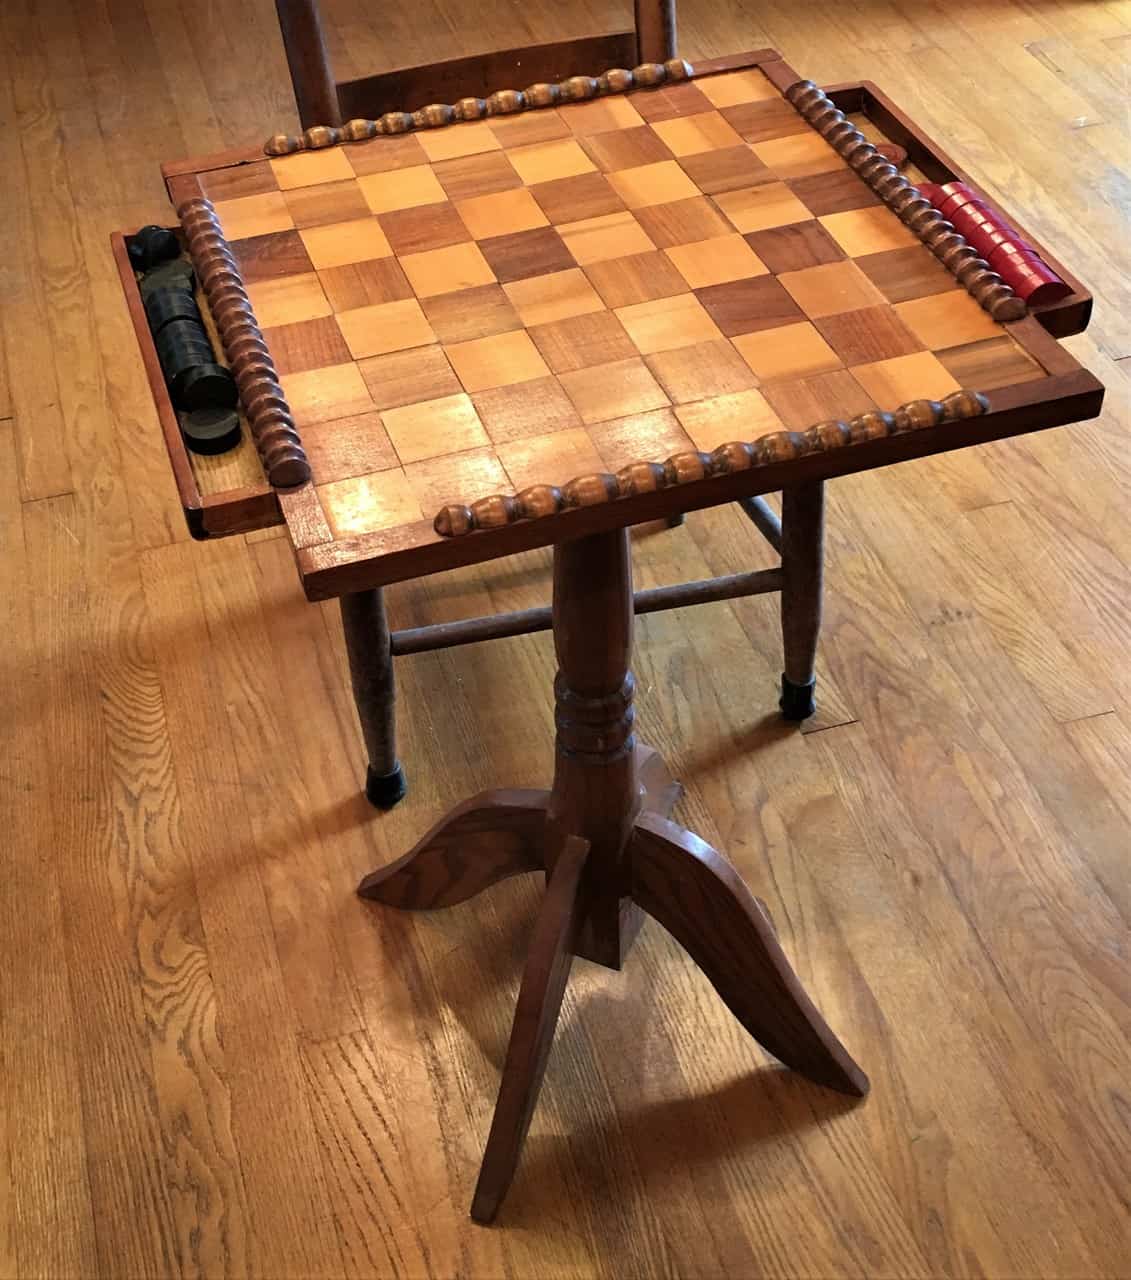 Checkerboard table with built-in trays to hold the checkers.